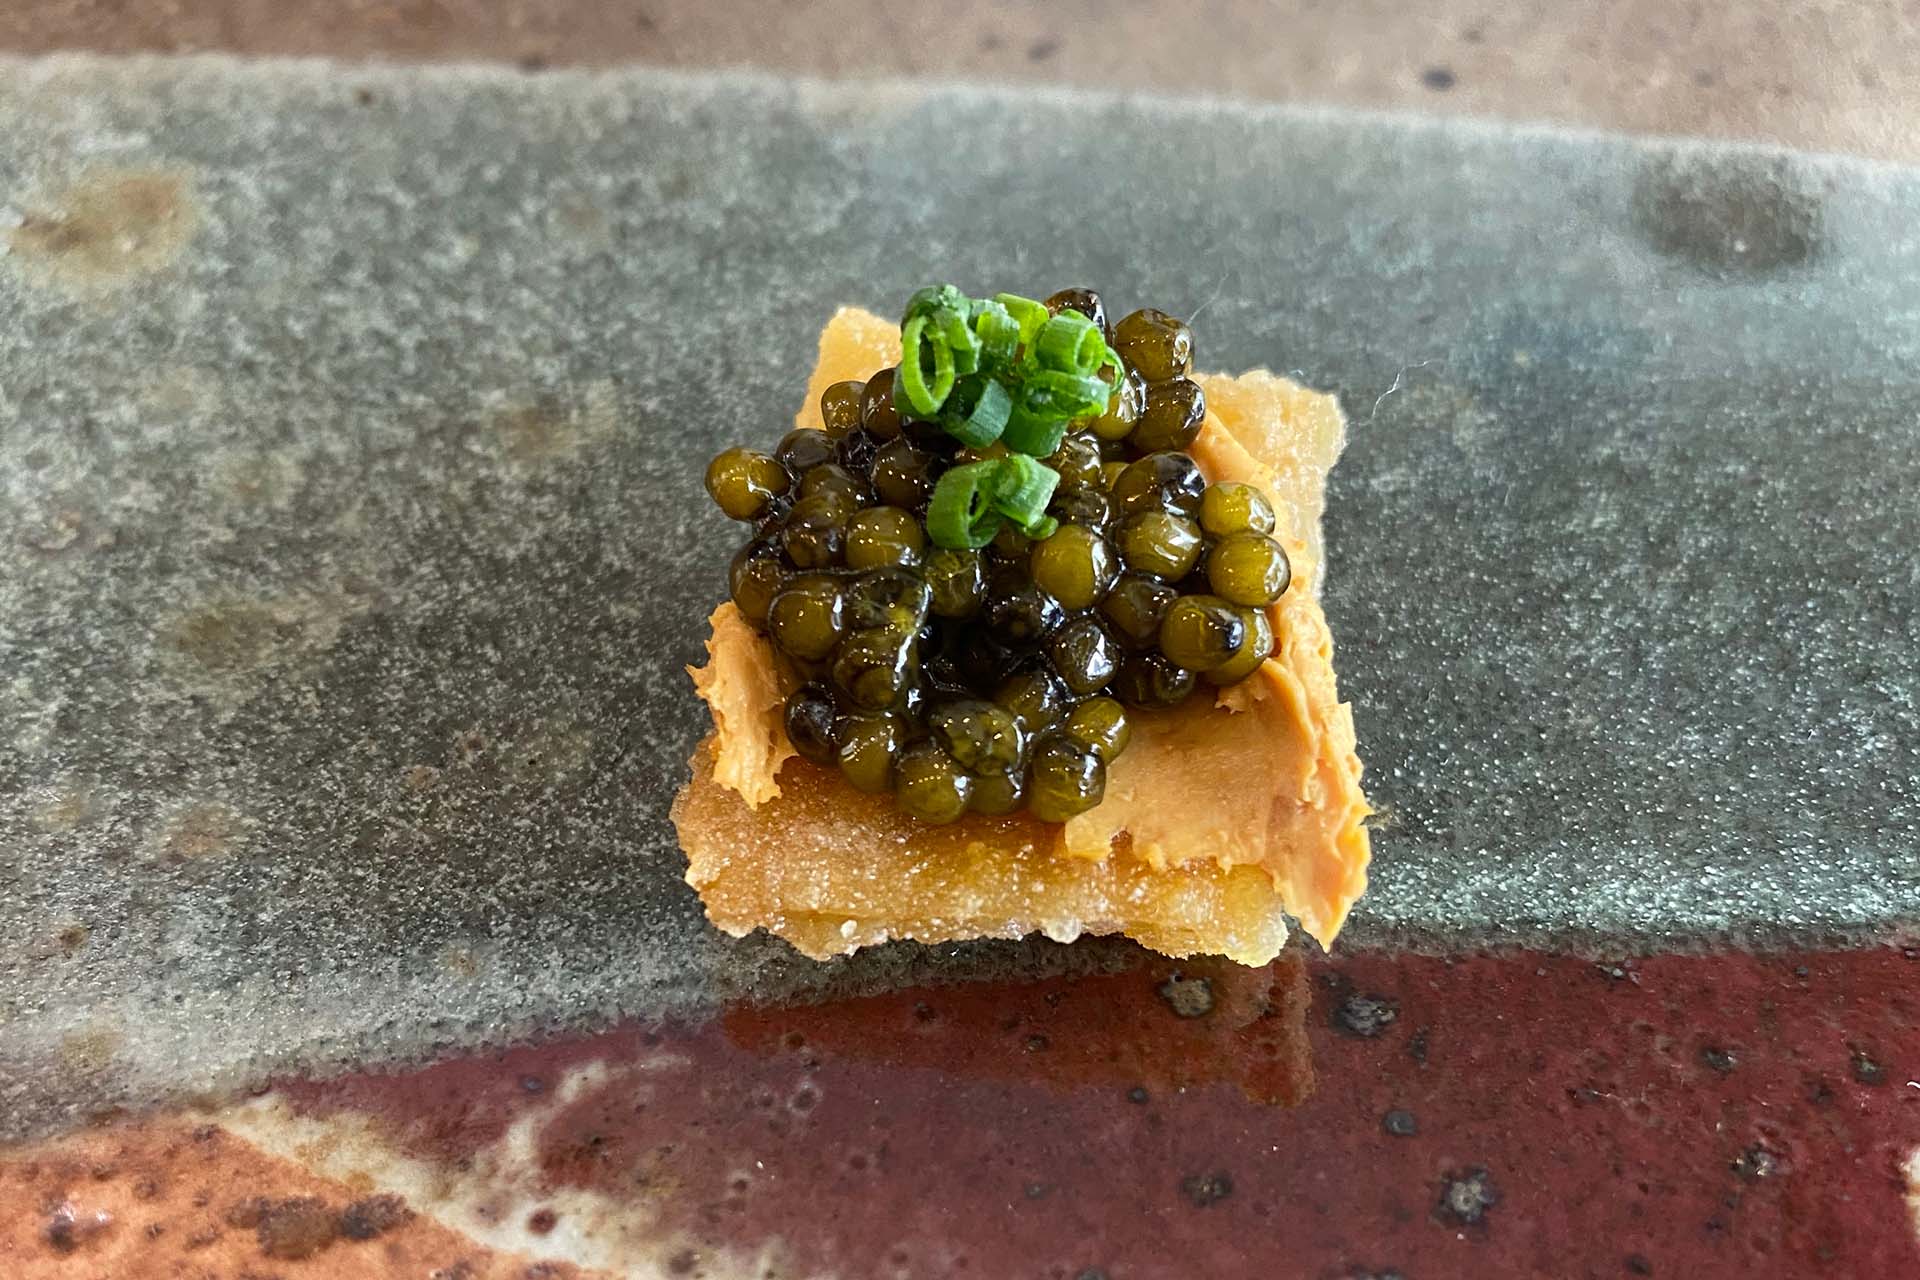 A square of crispy chicken skin topped with caviar.